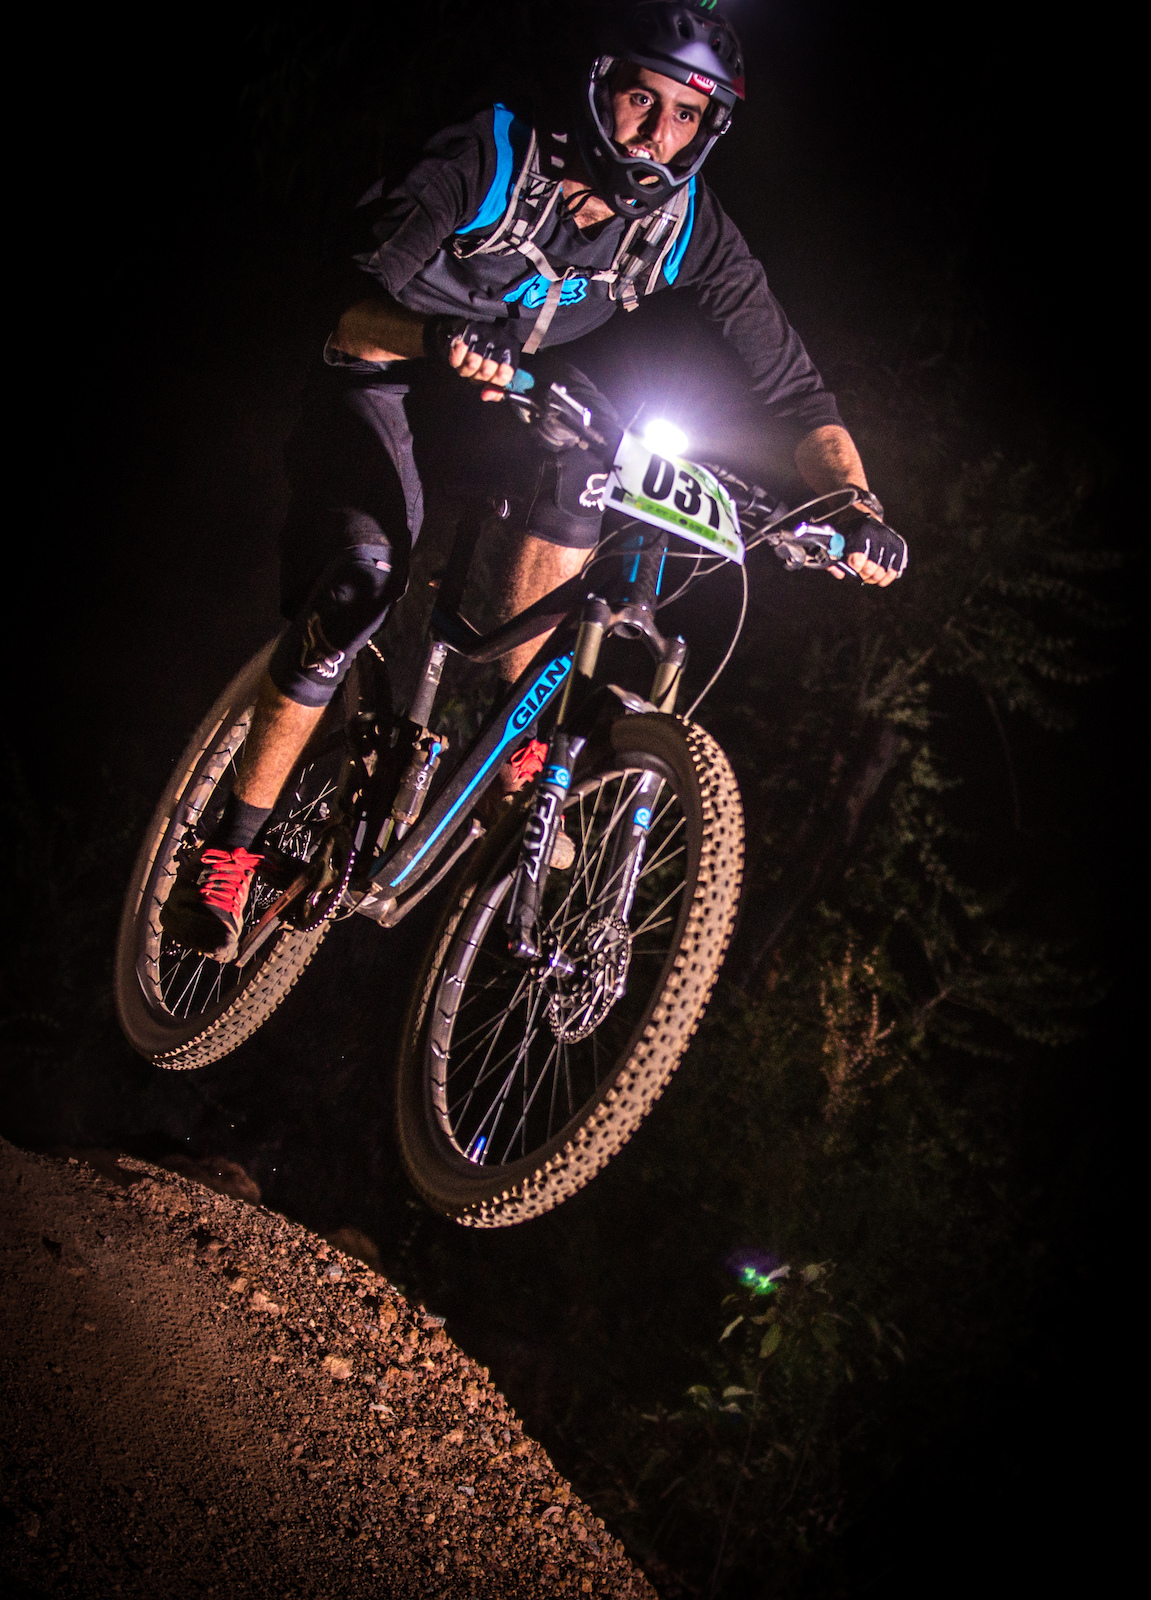 Racing a night time enduro event